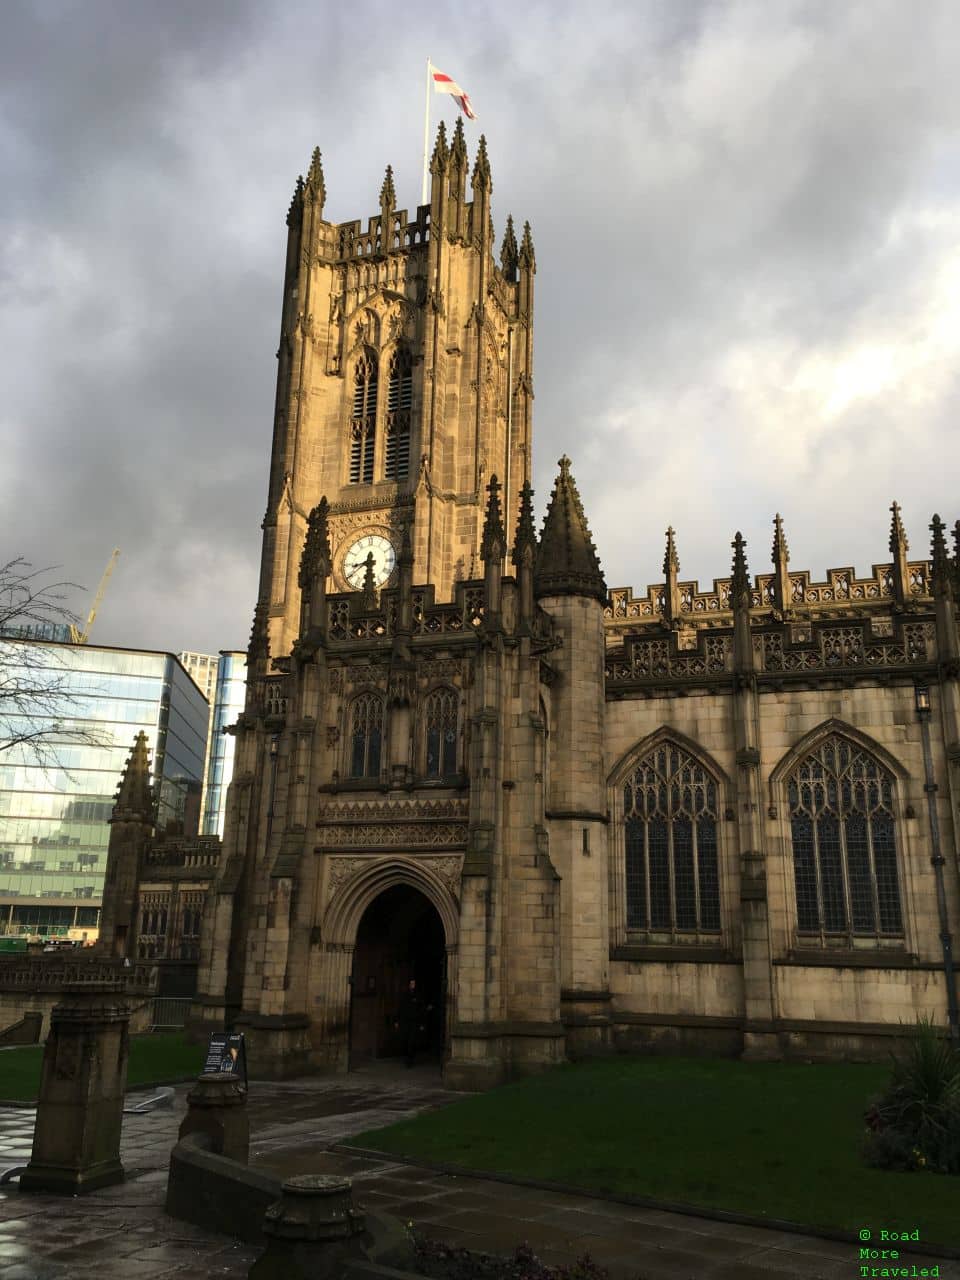 Sunday roasting and more in Manchester - Manchester Cathedral